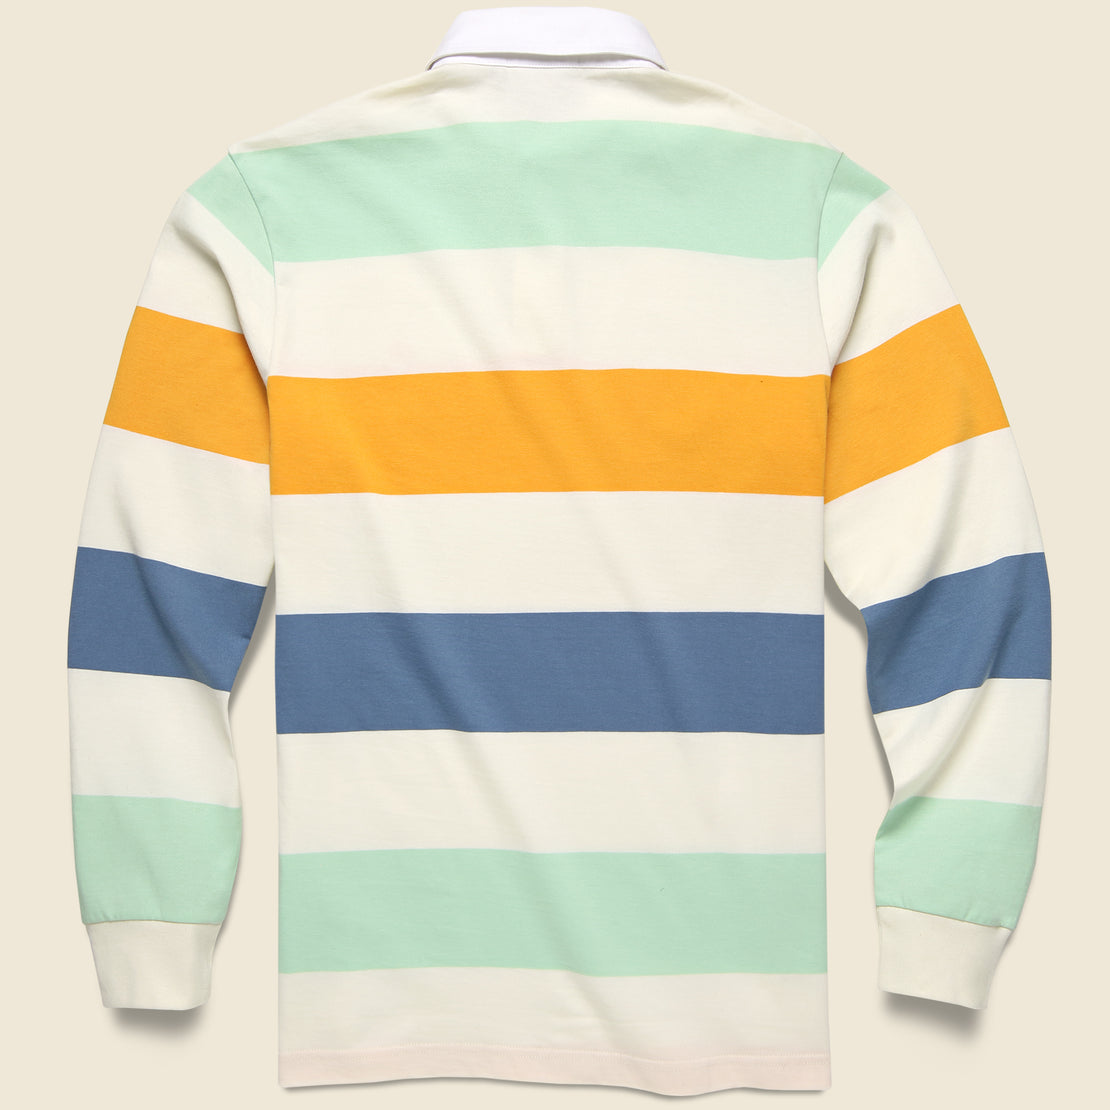 Henwick Stripe Rugby Shirt - Wax - Carhartt WIP - STAG Provisions - Tops - L/S Knit